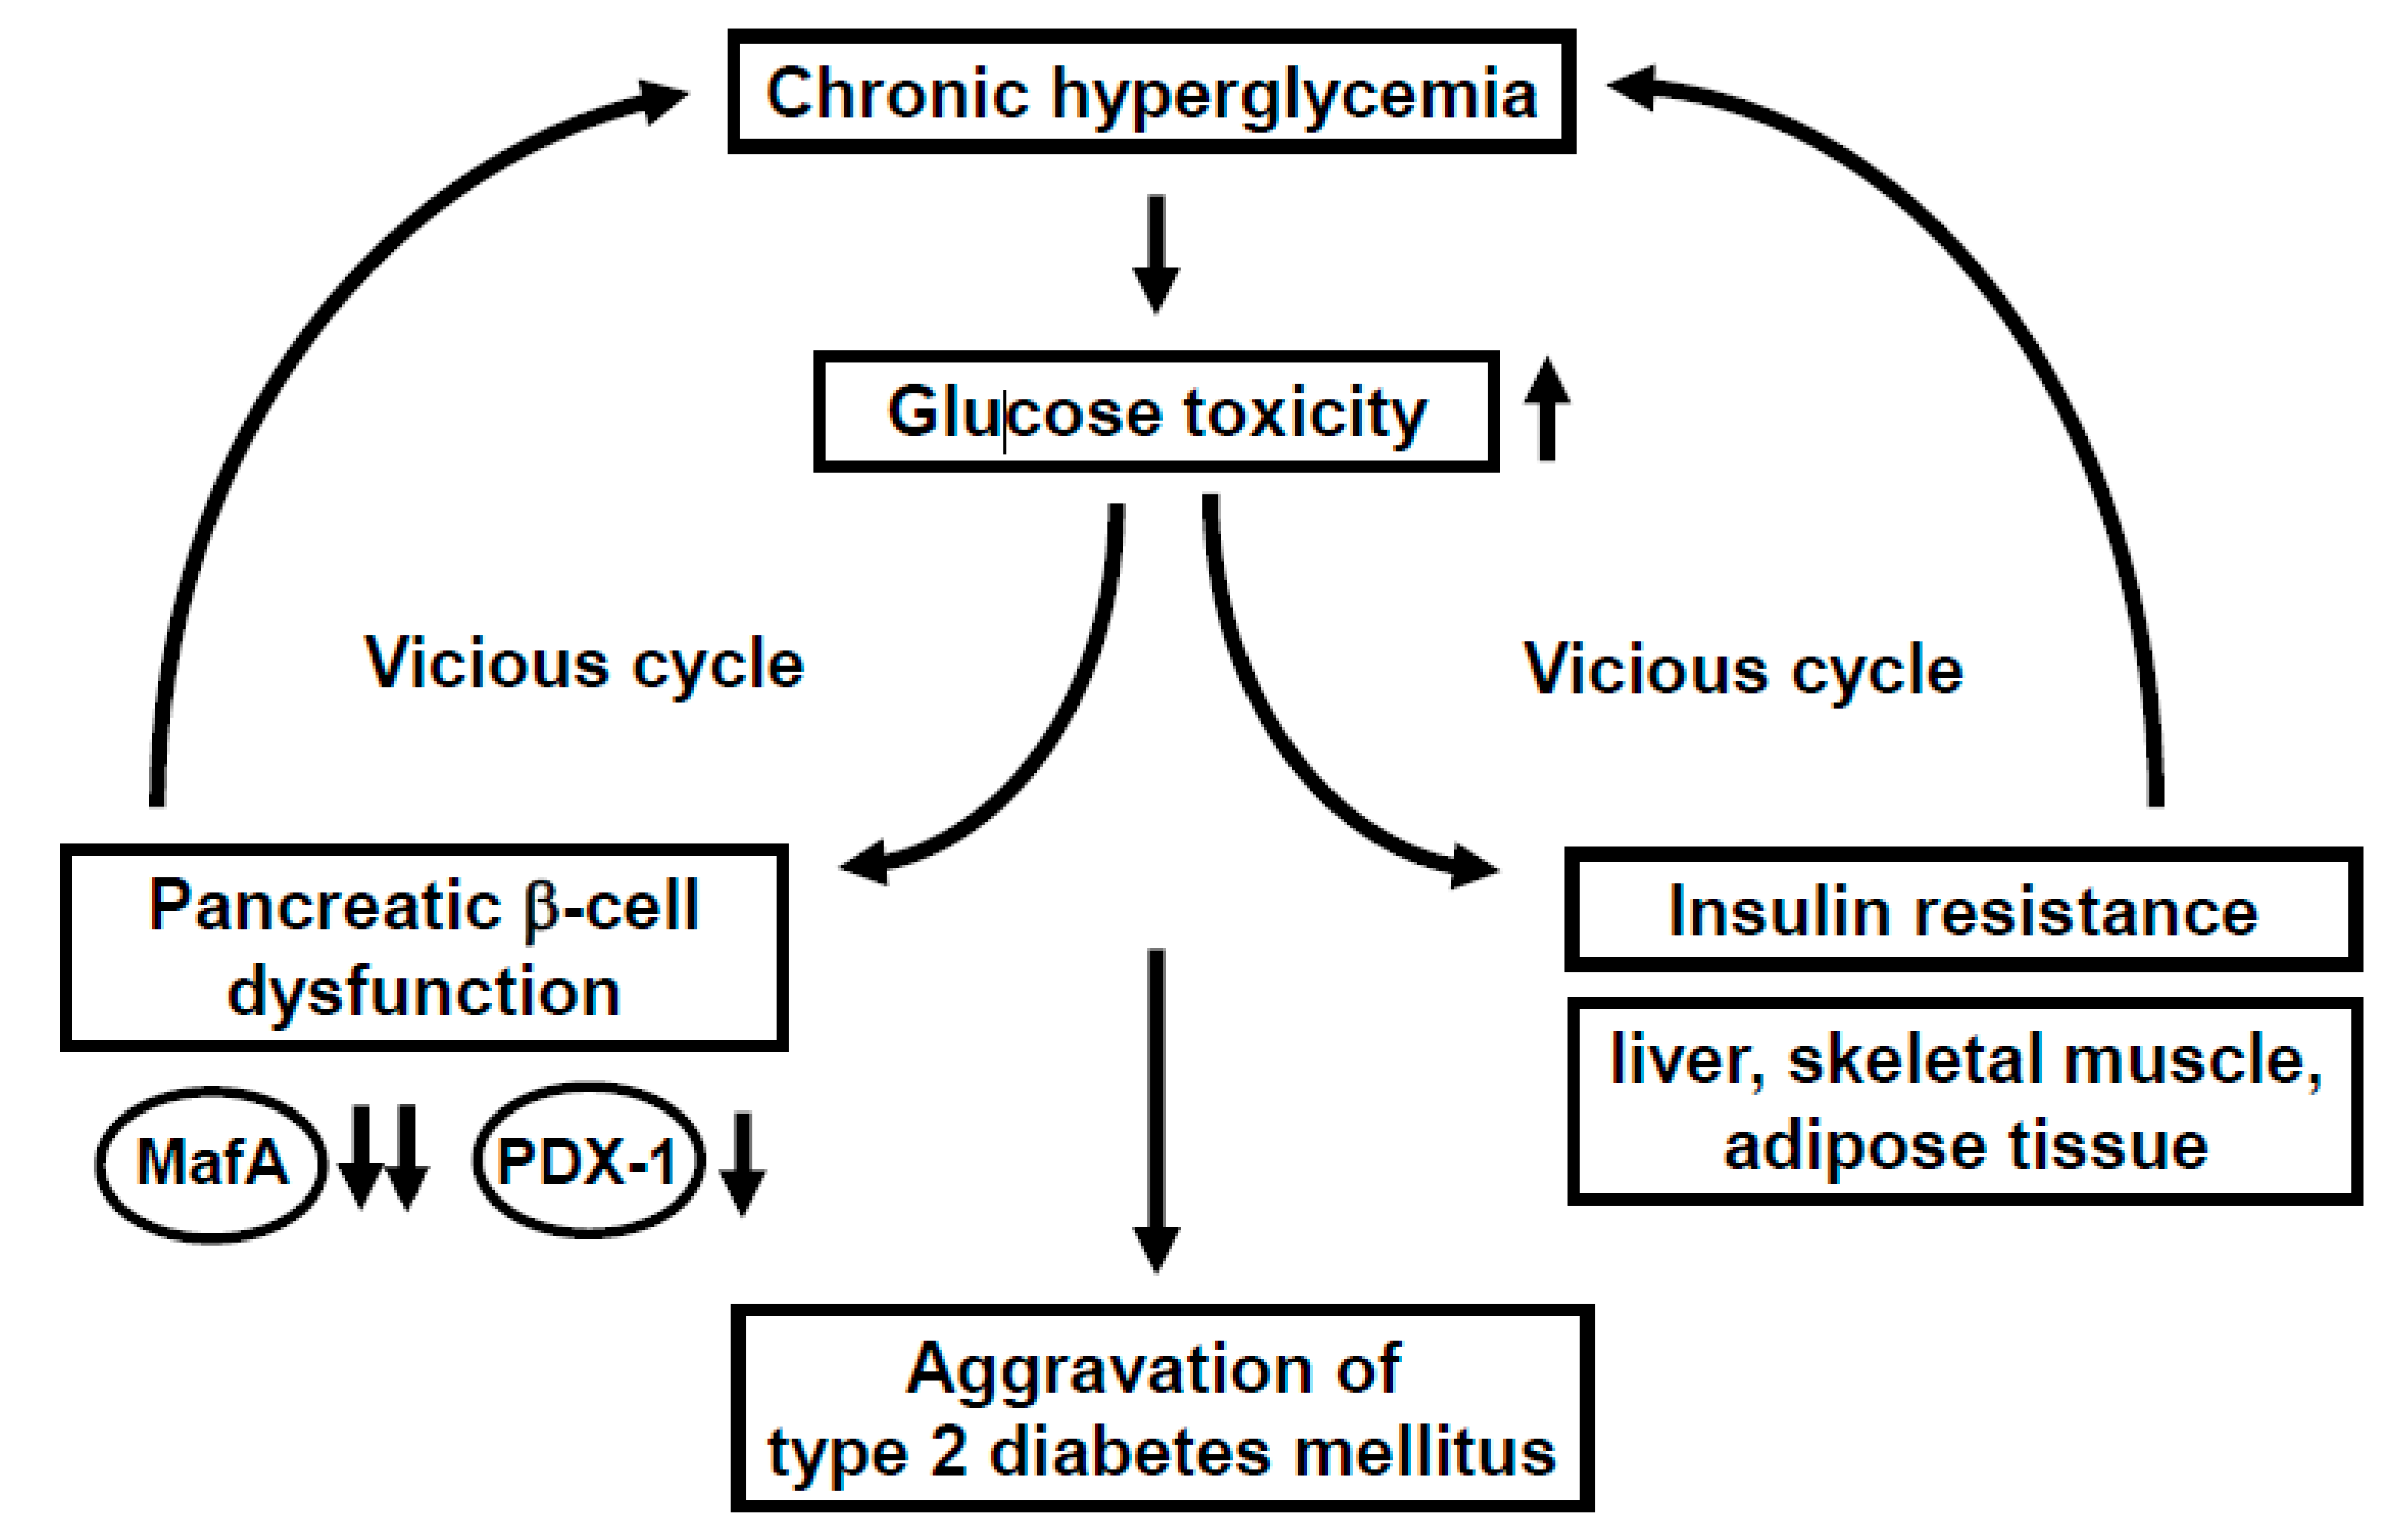 Chronic hyperglycemia and pancreatic dysfunction